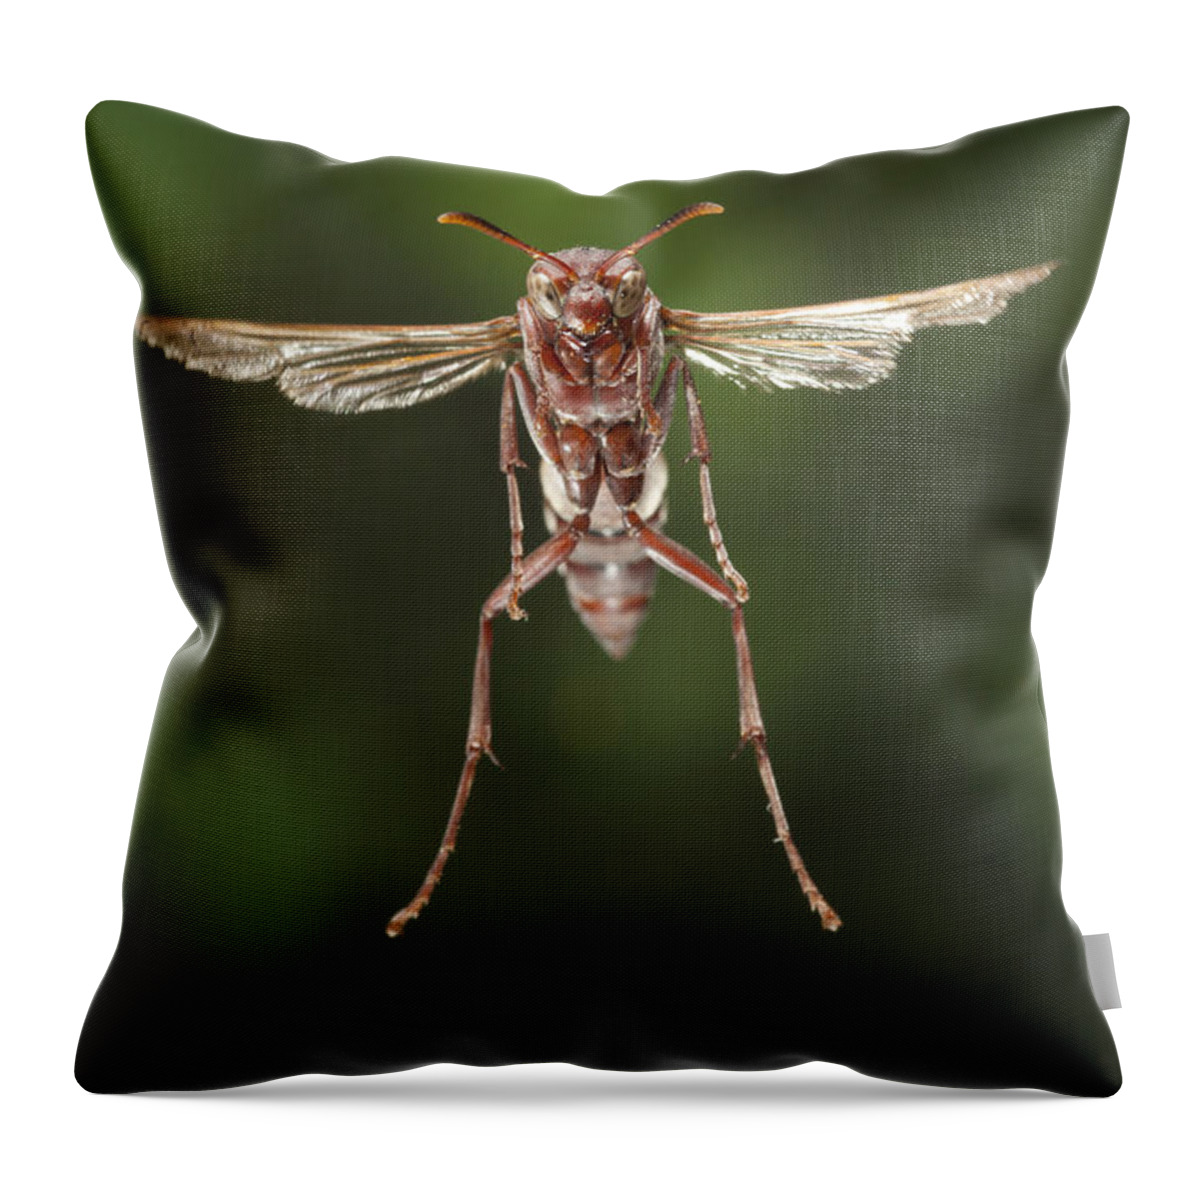 Feb0514 Throw Pillow featuring the photograph Wasp Flying Matobo Np Zimbabwe by Michael Durham